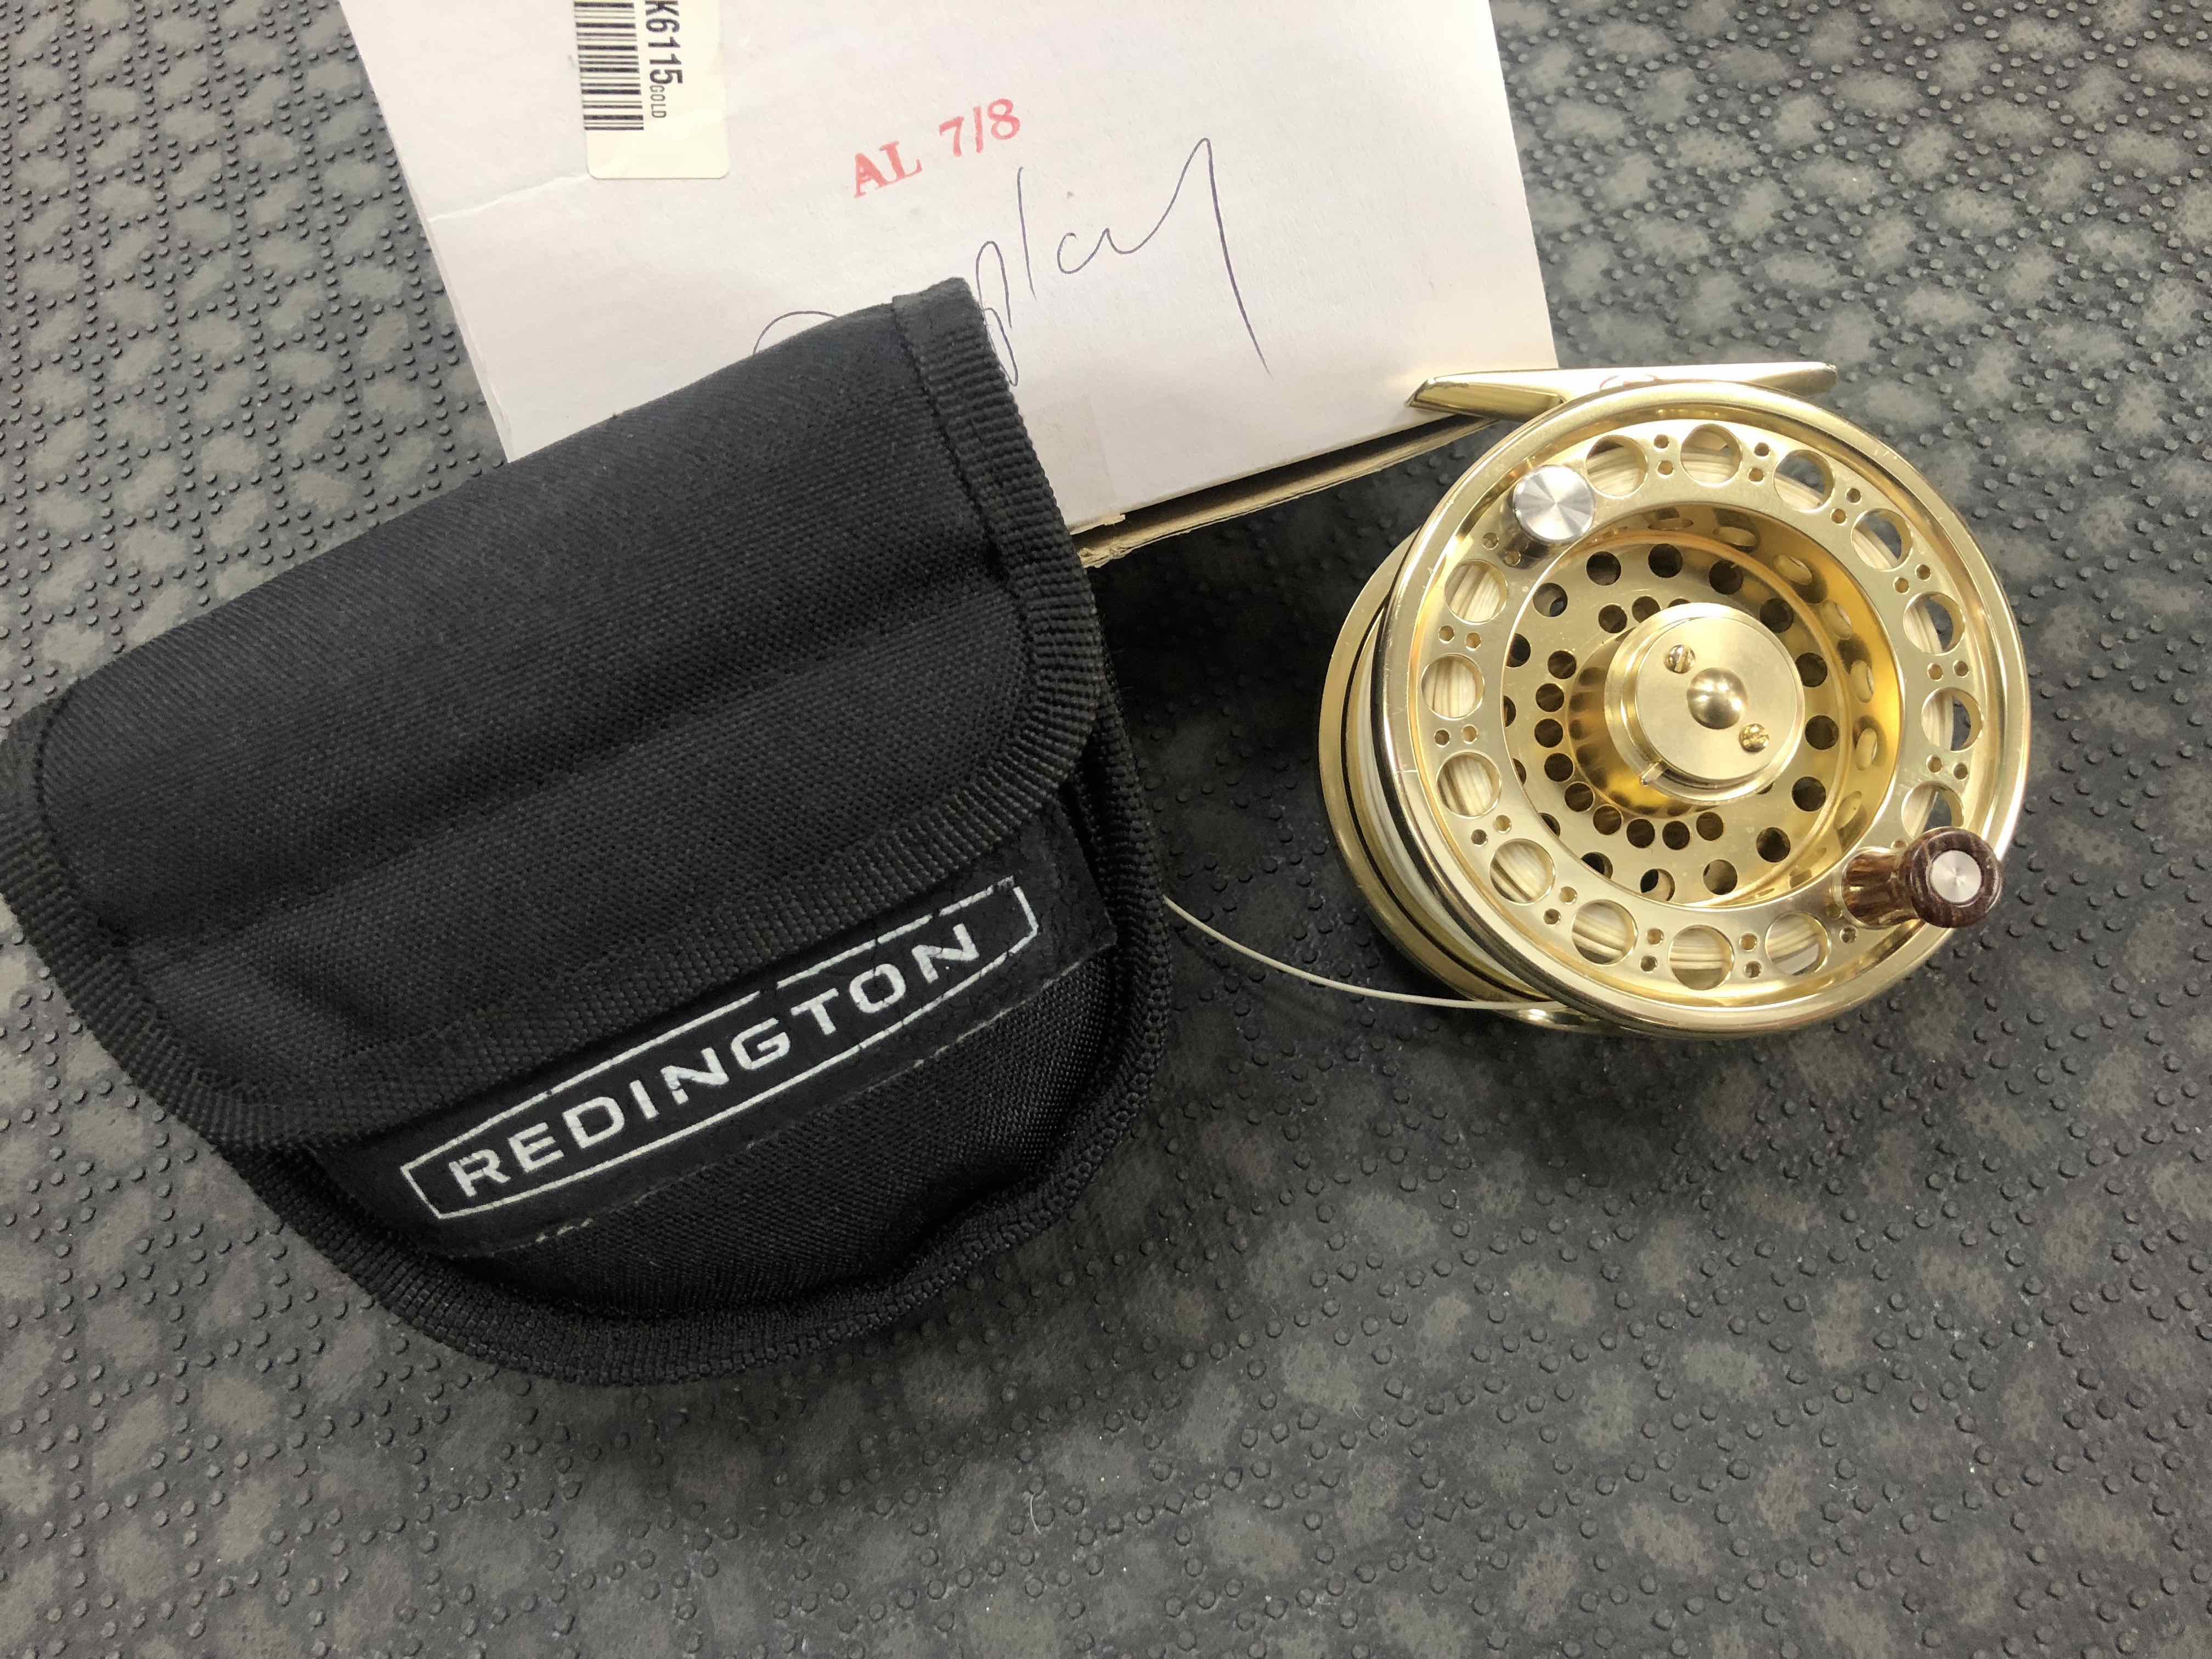 https://thefirstcast.ca/wp-content/uploads/2018/03/Redington-Large-Arbor-Fly-reel-Model-AL-78-Golstone-Lined-with-TT7F-cw-Pouch-BB.jpg